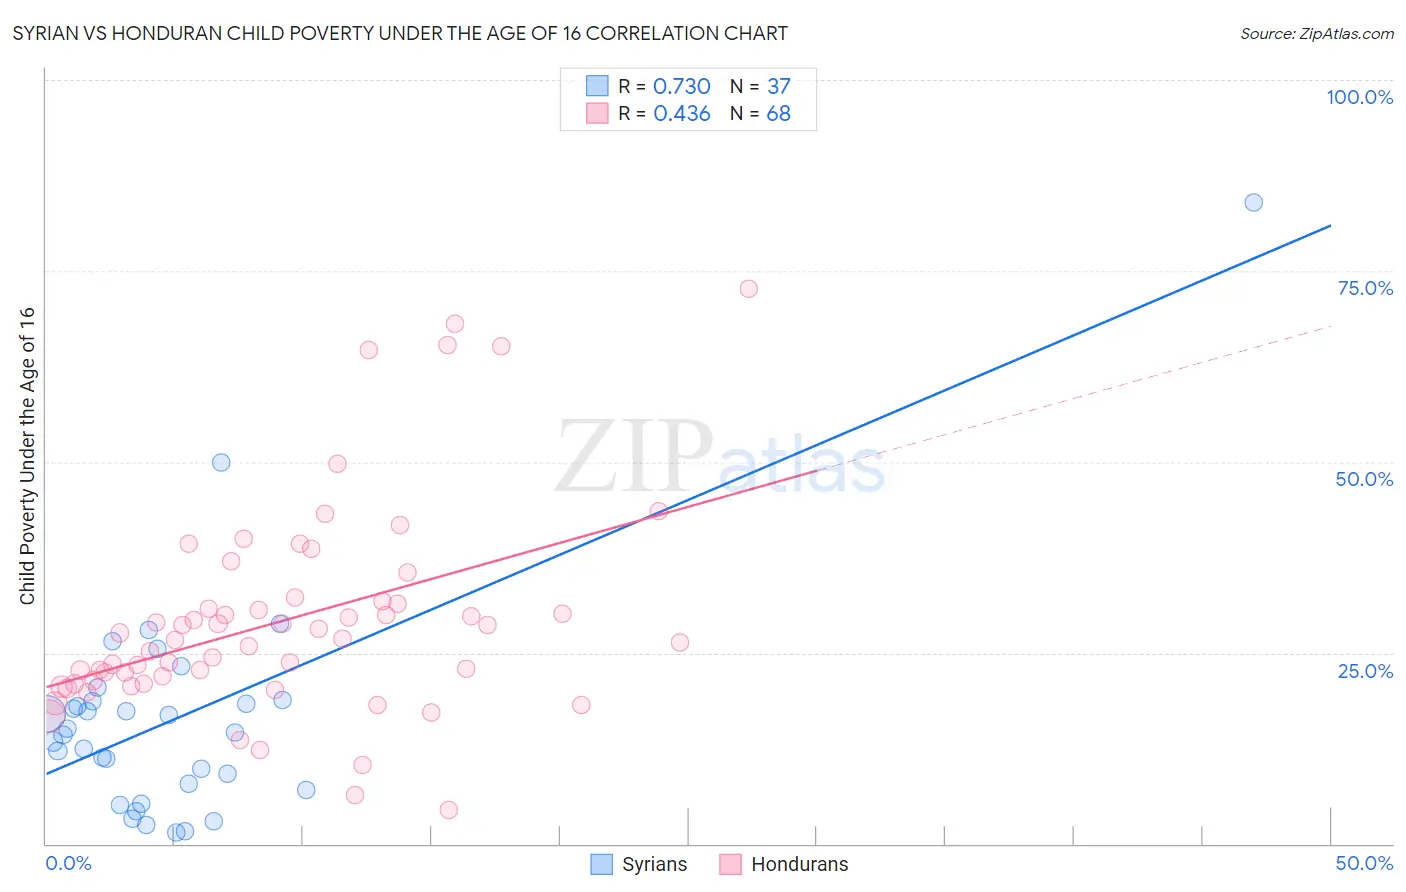 Syrian vs Honduran Child Poverty Under the Age of 16